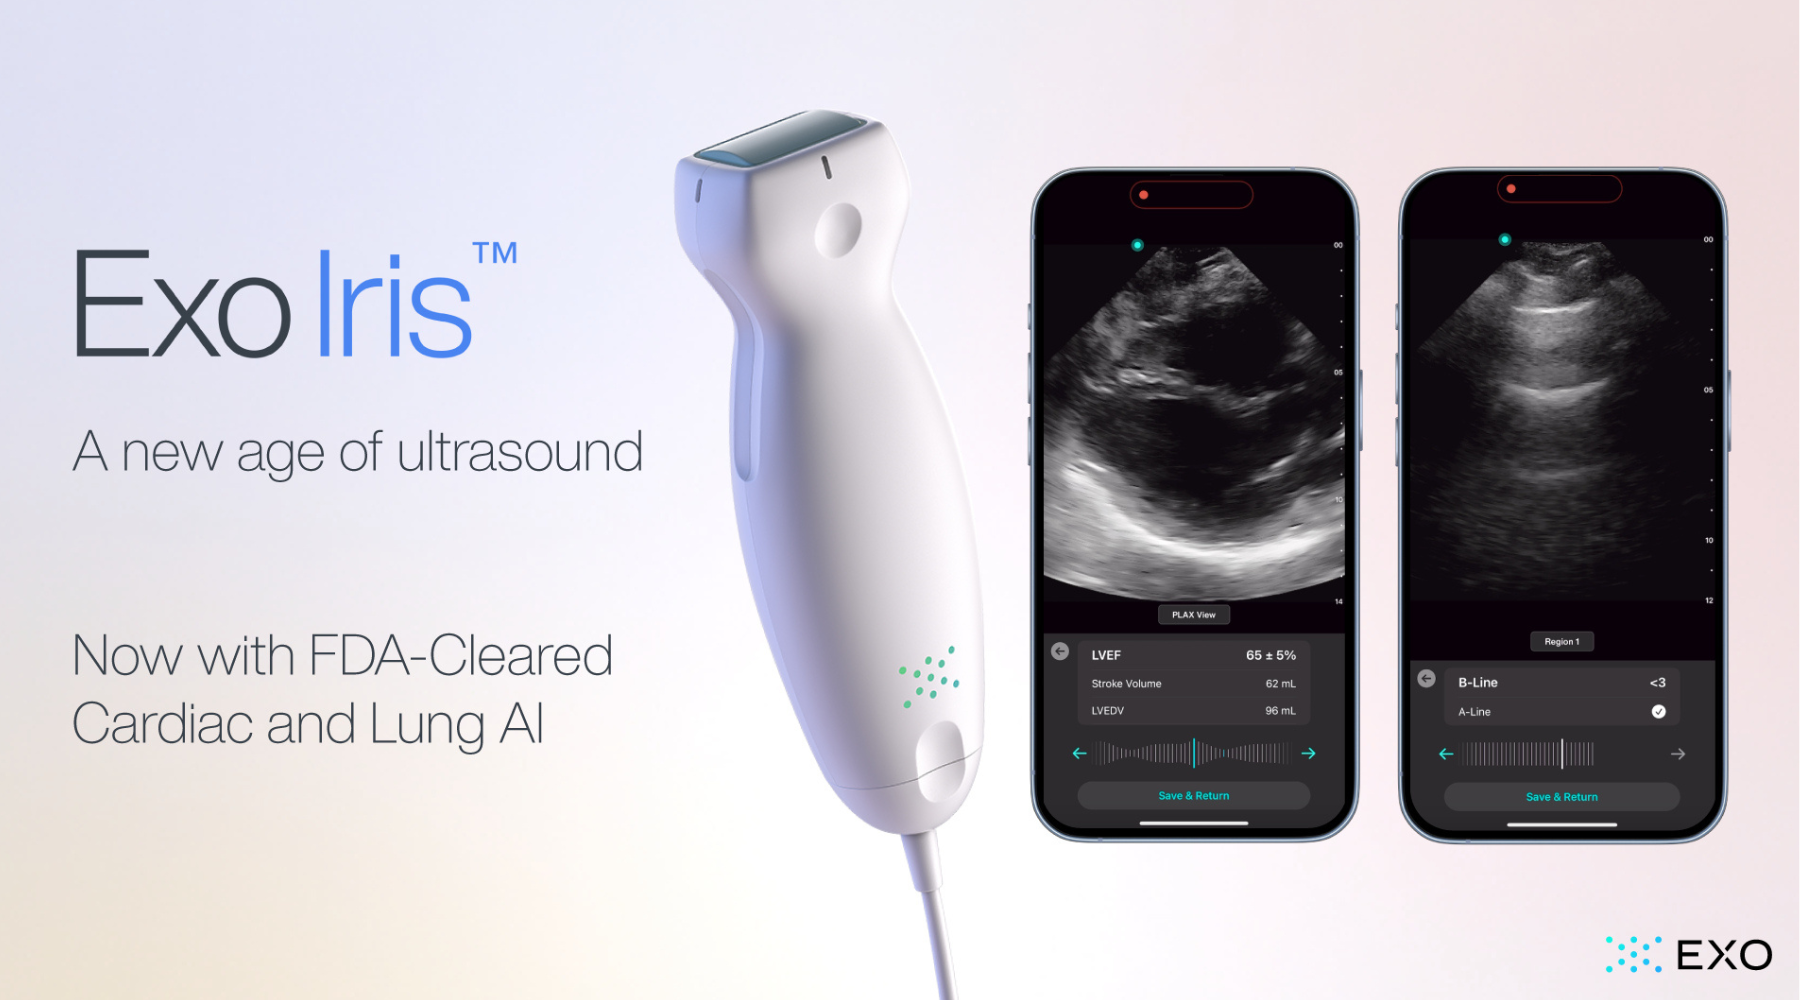 Exo’s FDA Cleared Cardiac &amp; Lung AI Now on Iris Handheld
Ultrasound